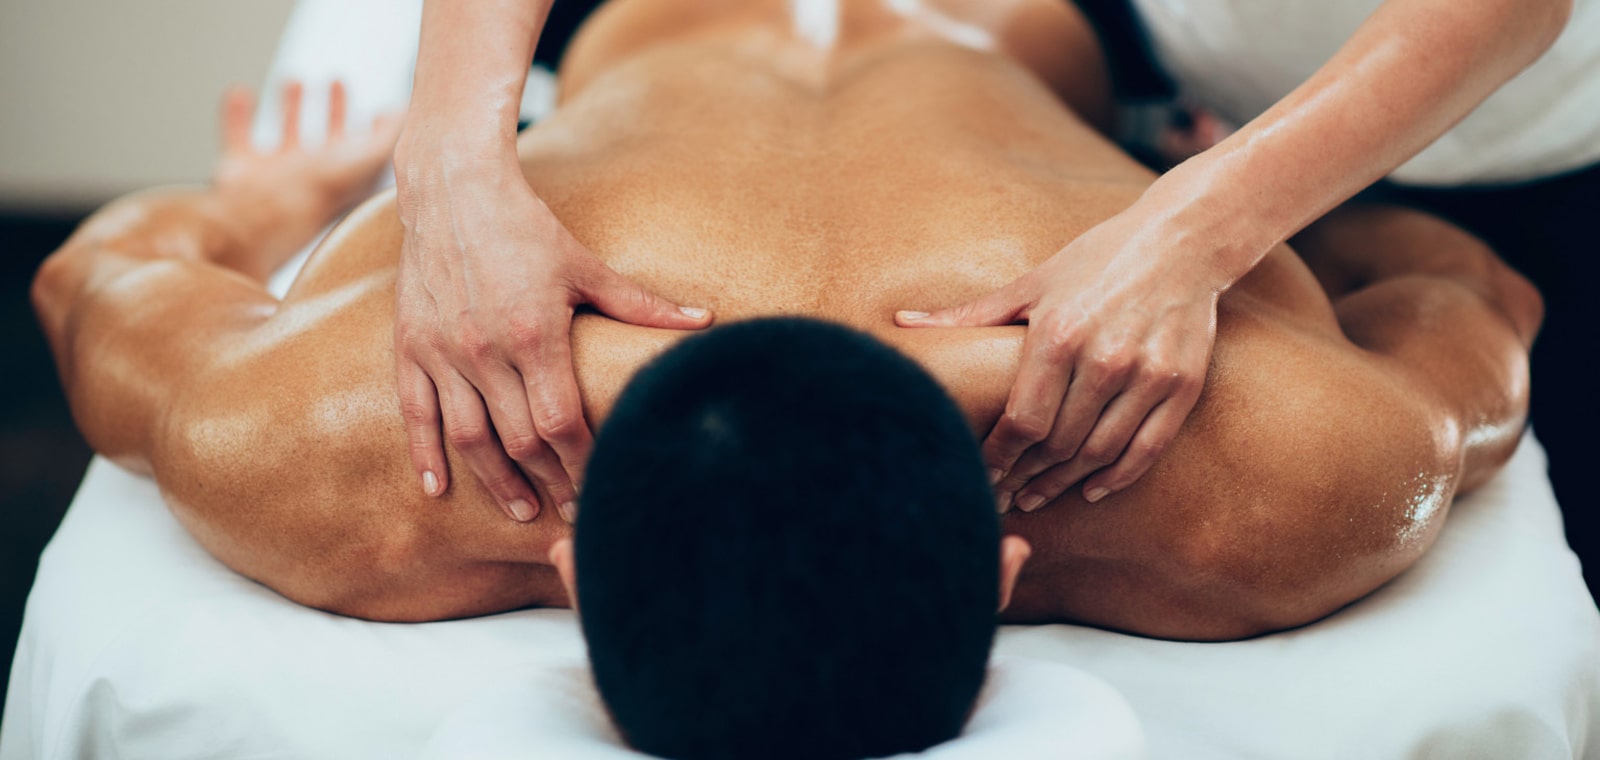 What is a deep tissue massage?